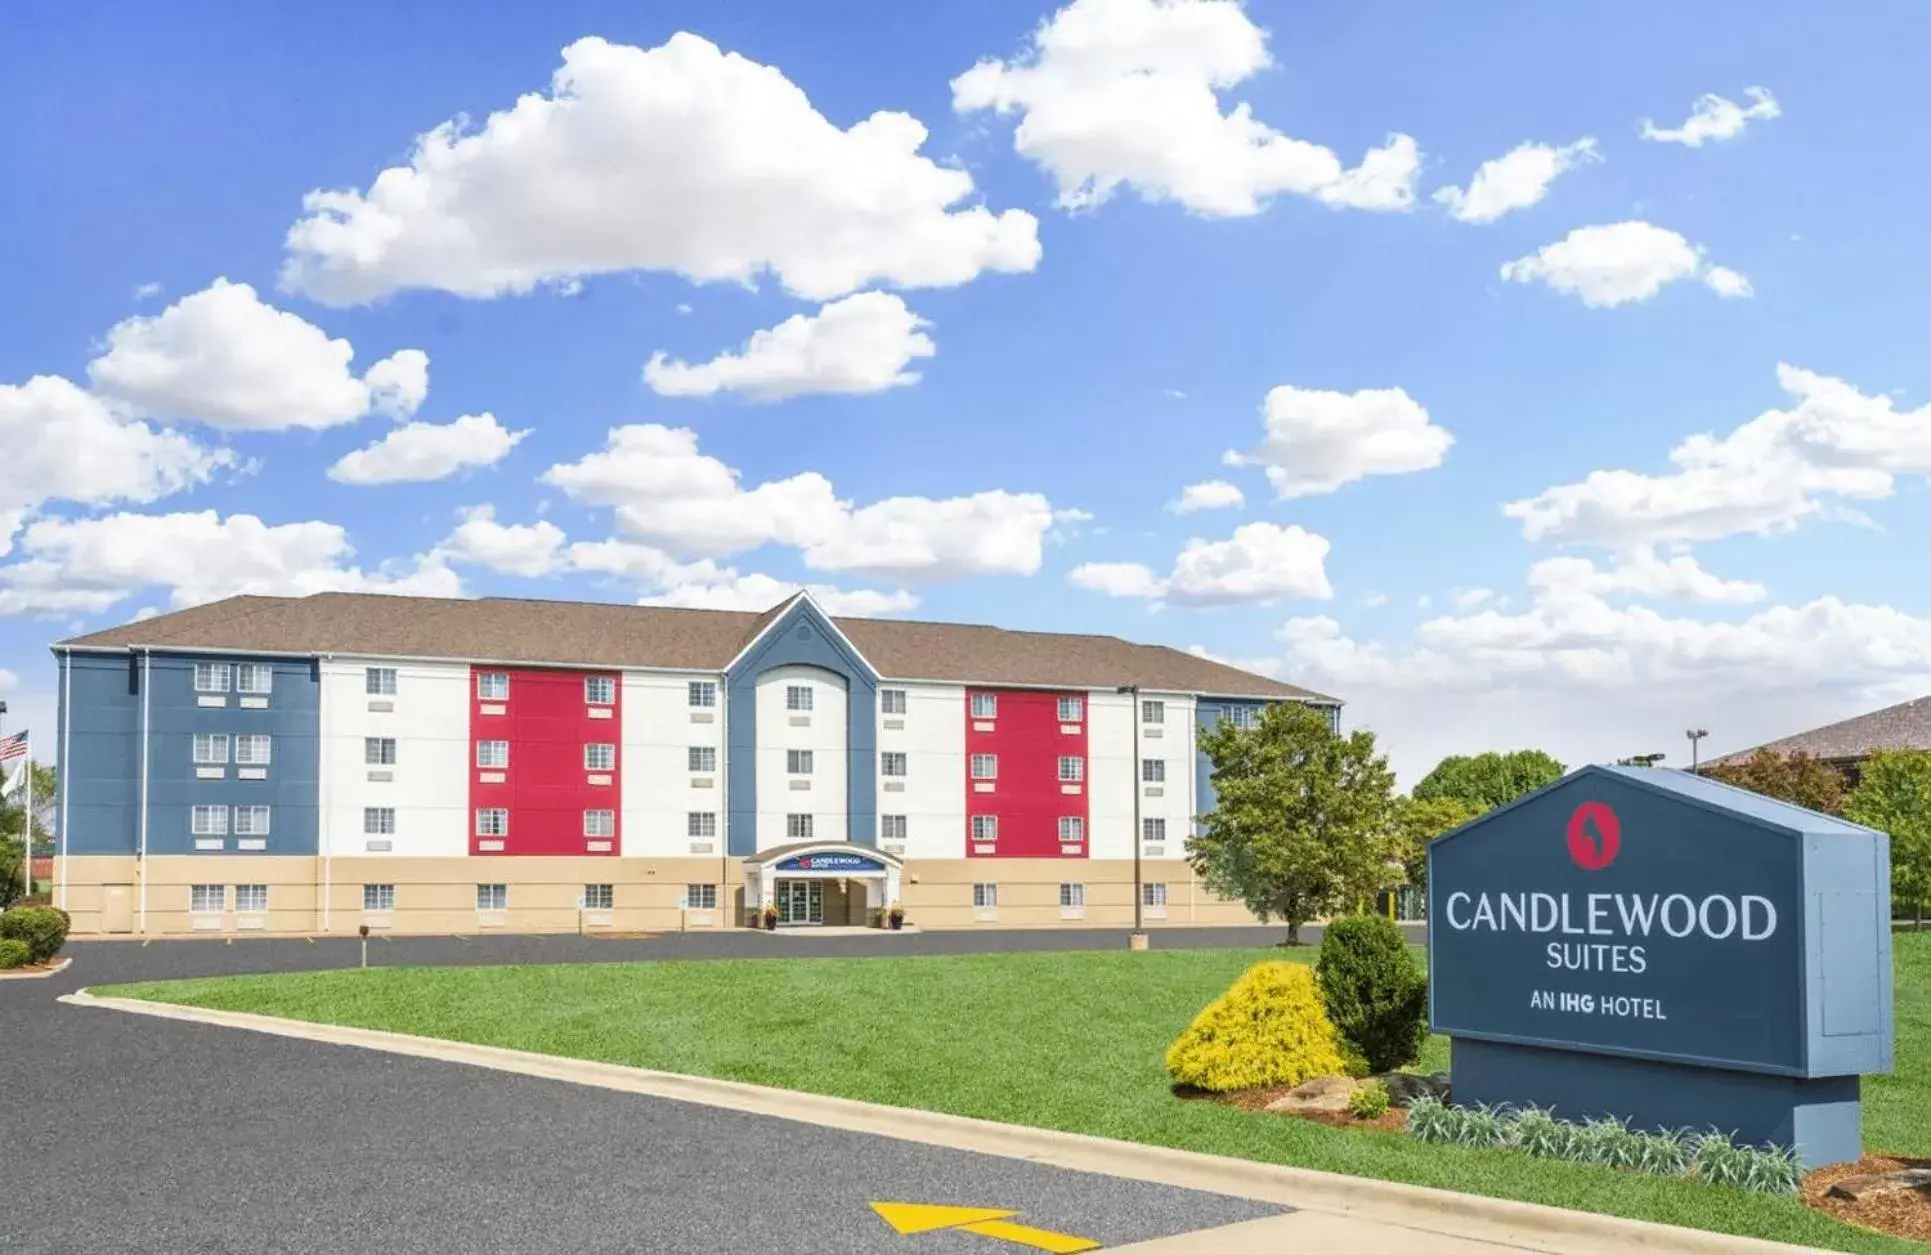 Property Building in Candlewood Suites Ofallon, Il - St. Louis Area, an IHG Hotel